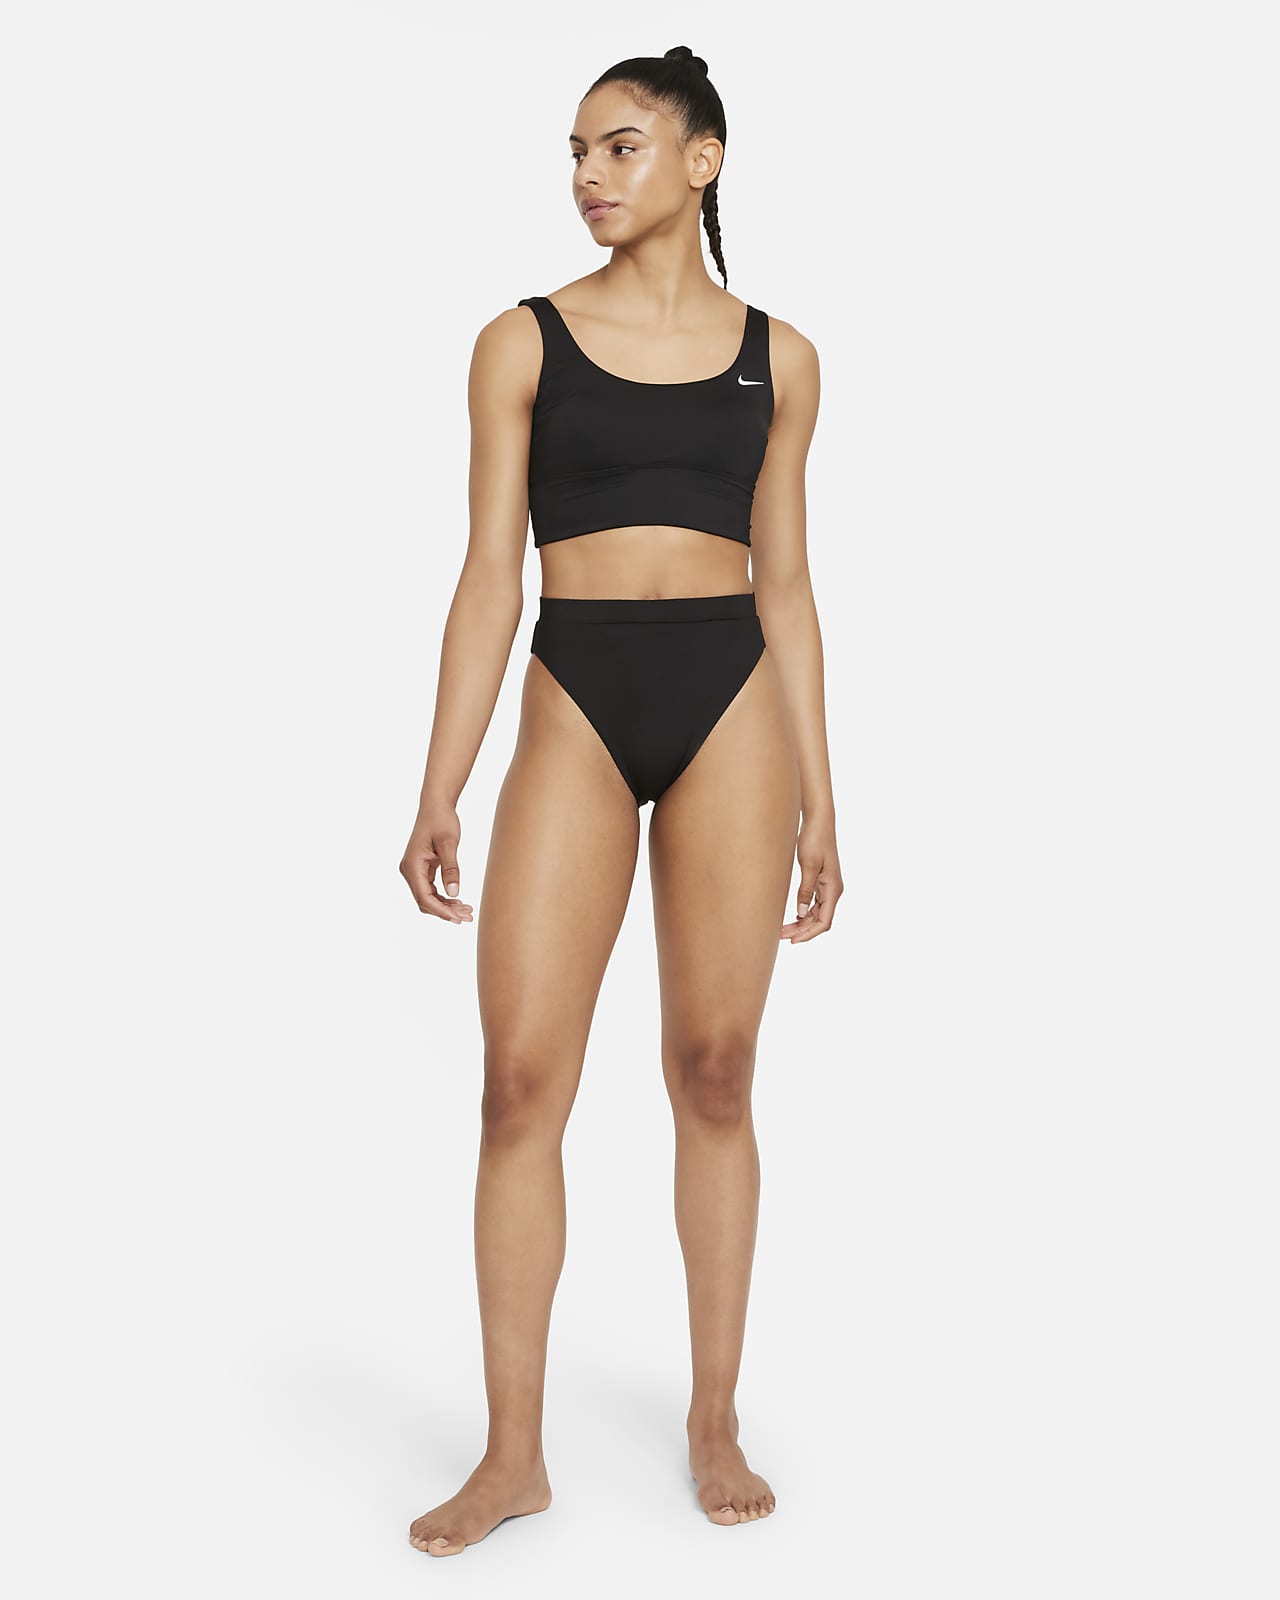 https://static.nike.com/a/images/t_PDP_1280_v1/f_auto,q_auto:eco/bb46ff43-12bc-4ddb-8327-b049831b044d/essential-high-waisted-swimming-bottoms-FLX6mD.png